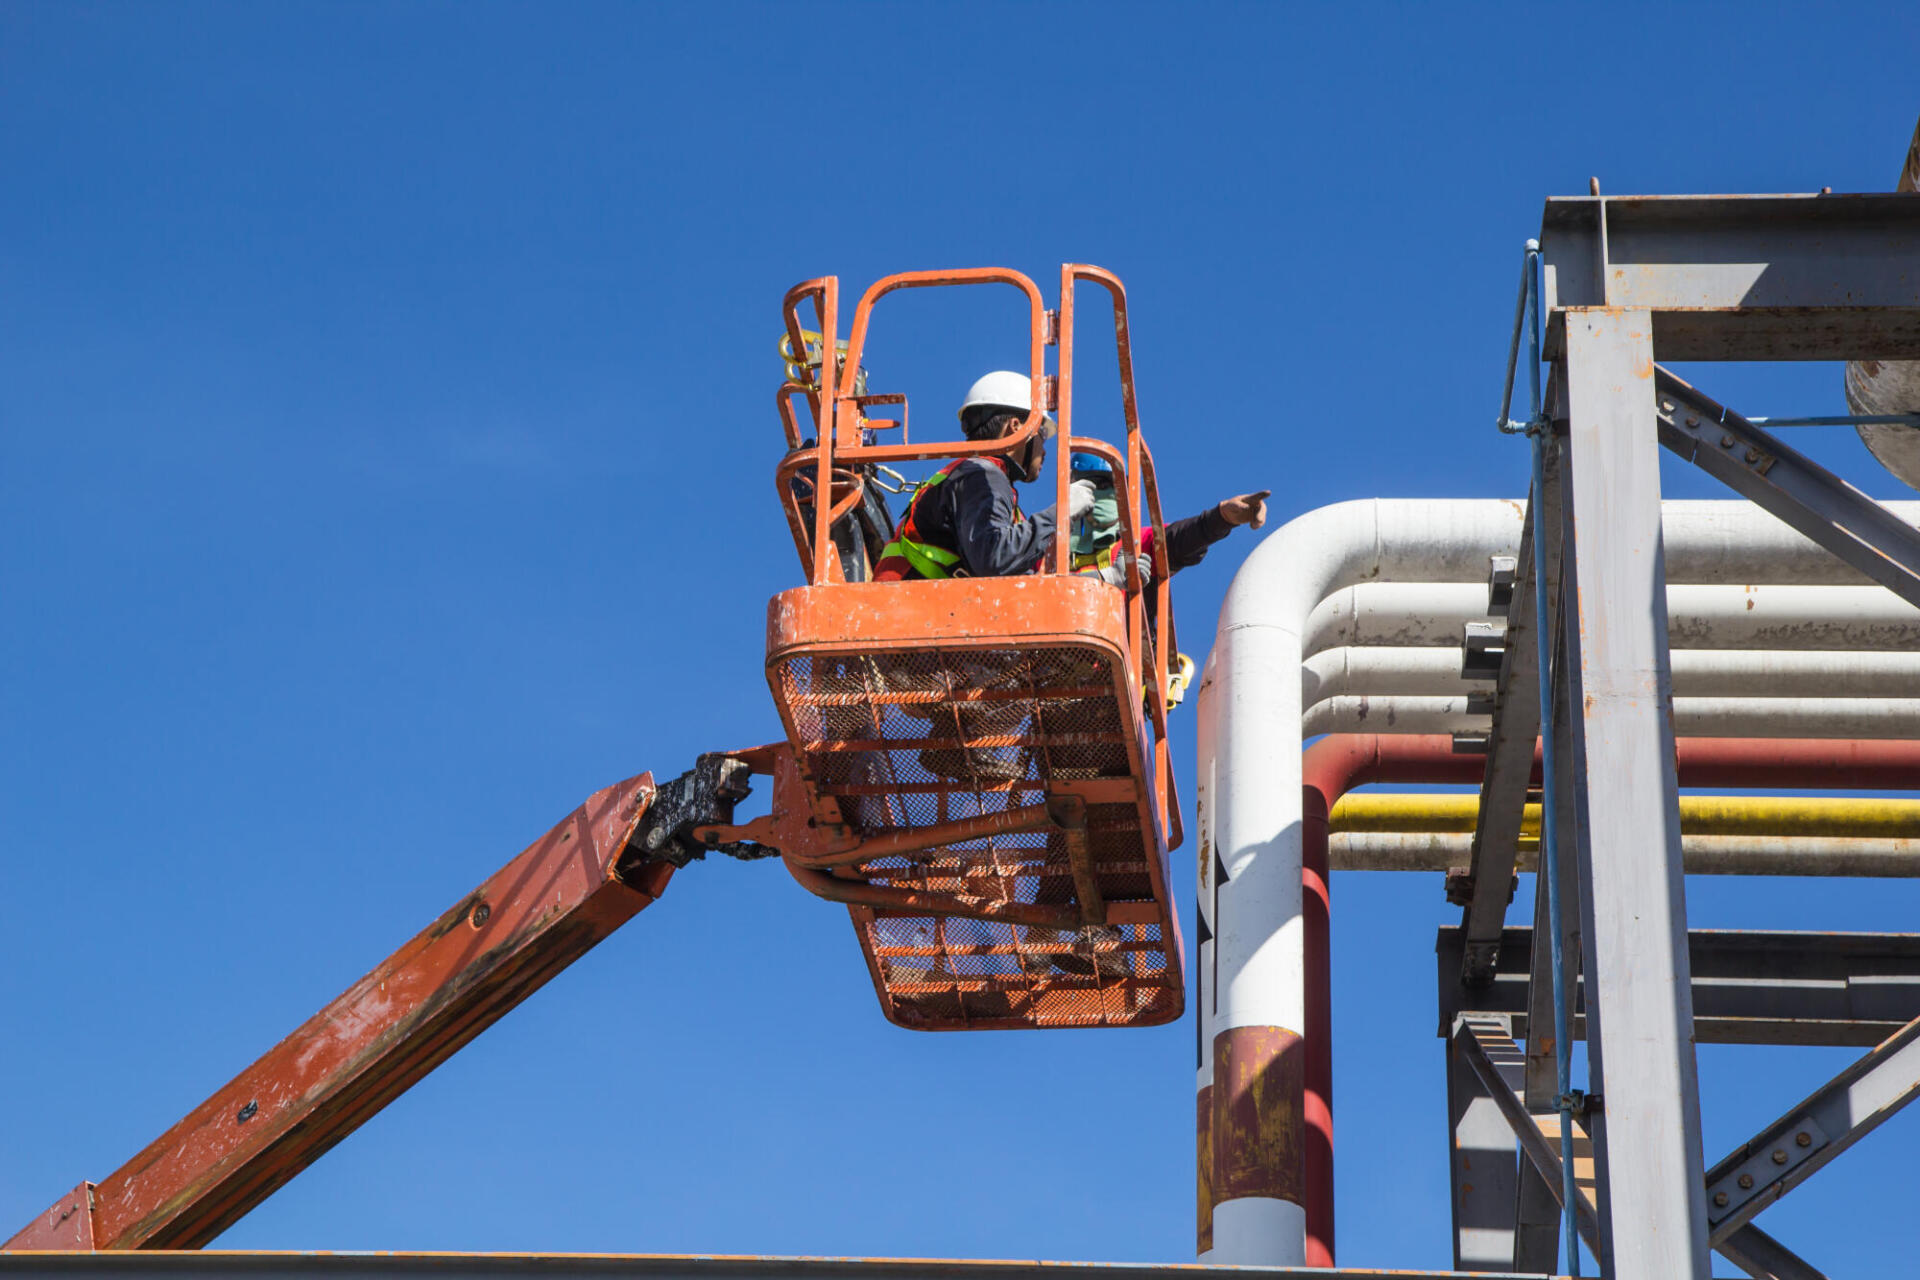 Aerial lift operator in action, as trained by Northern Ohio Equipment Services in Medina, Ohio